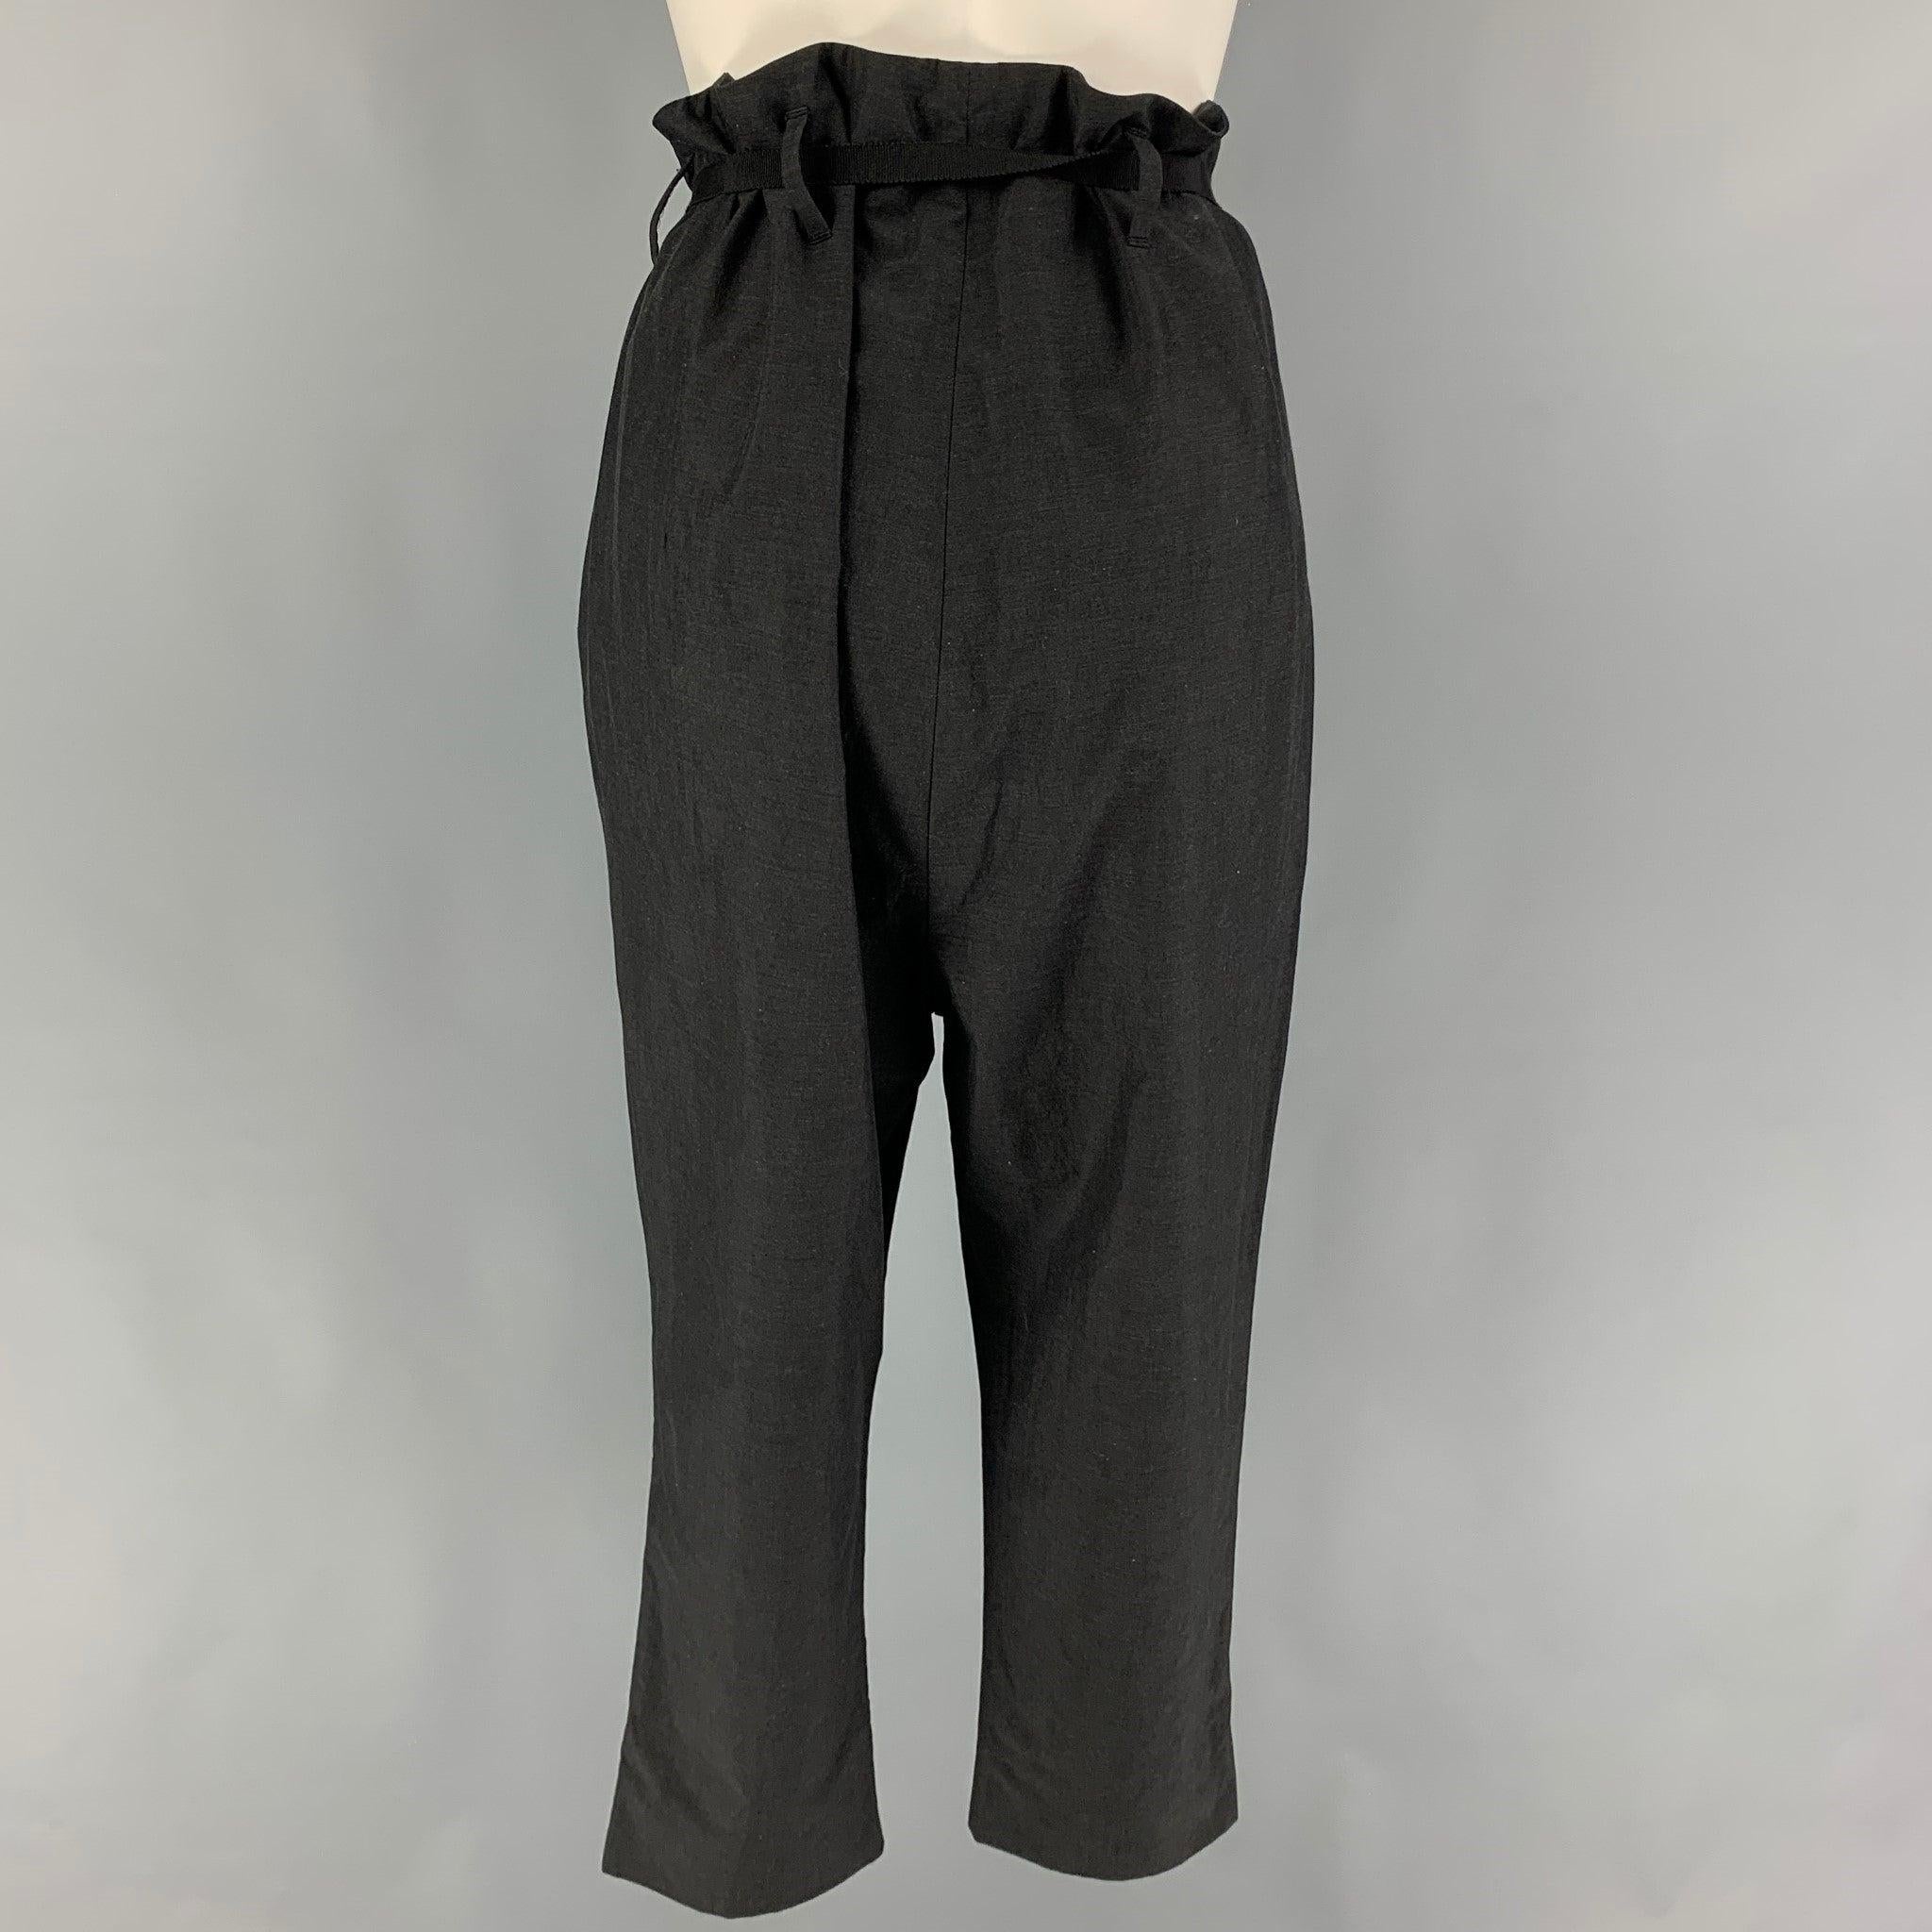 MARNI Size 4 Black Cotton High Waisted Dress Pants In Good Condition For Sale In San Francisco, CA